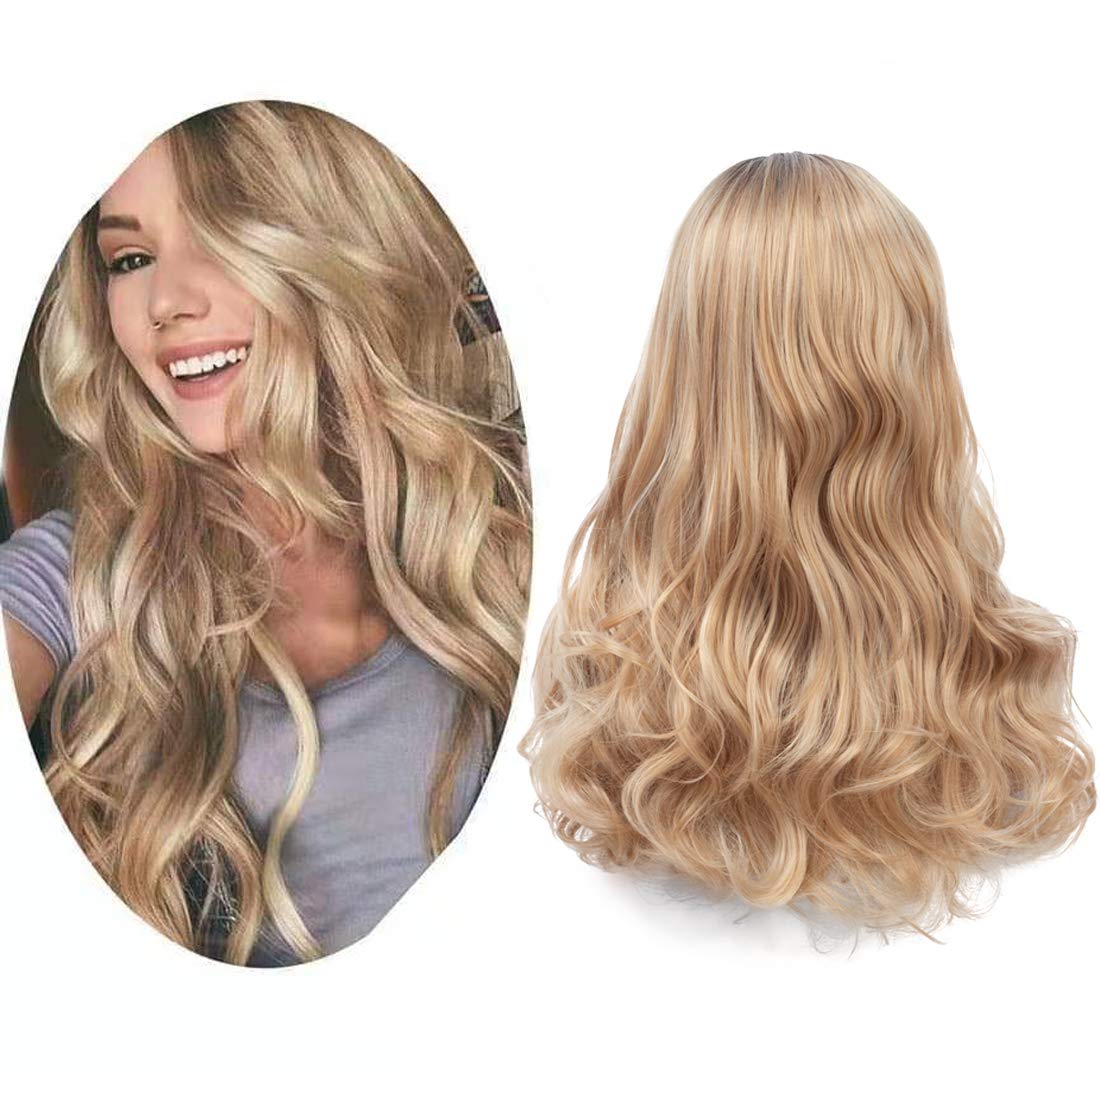 Price:$15.99     DDHAIR Ombre Blonde Wigs For Women With Middle Natural Wave Long Blonde Wig Curly Heat Resistant Synthetic Wig   Beauty